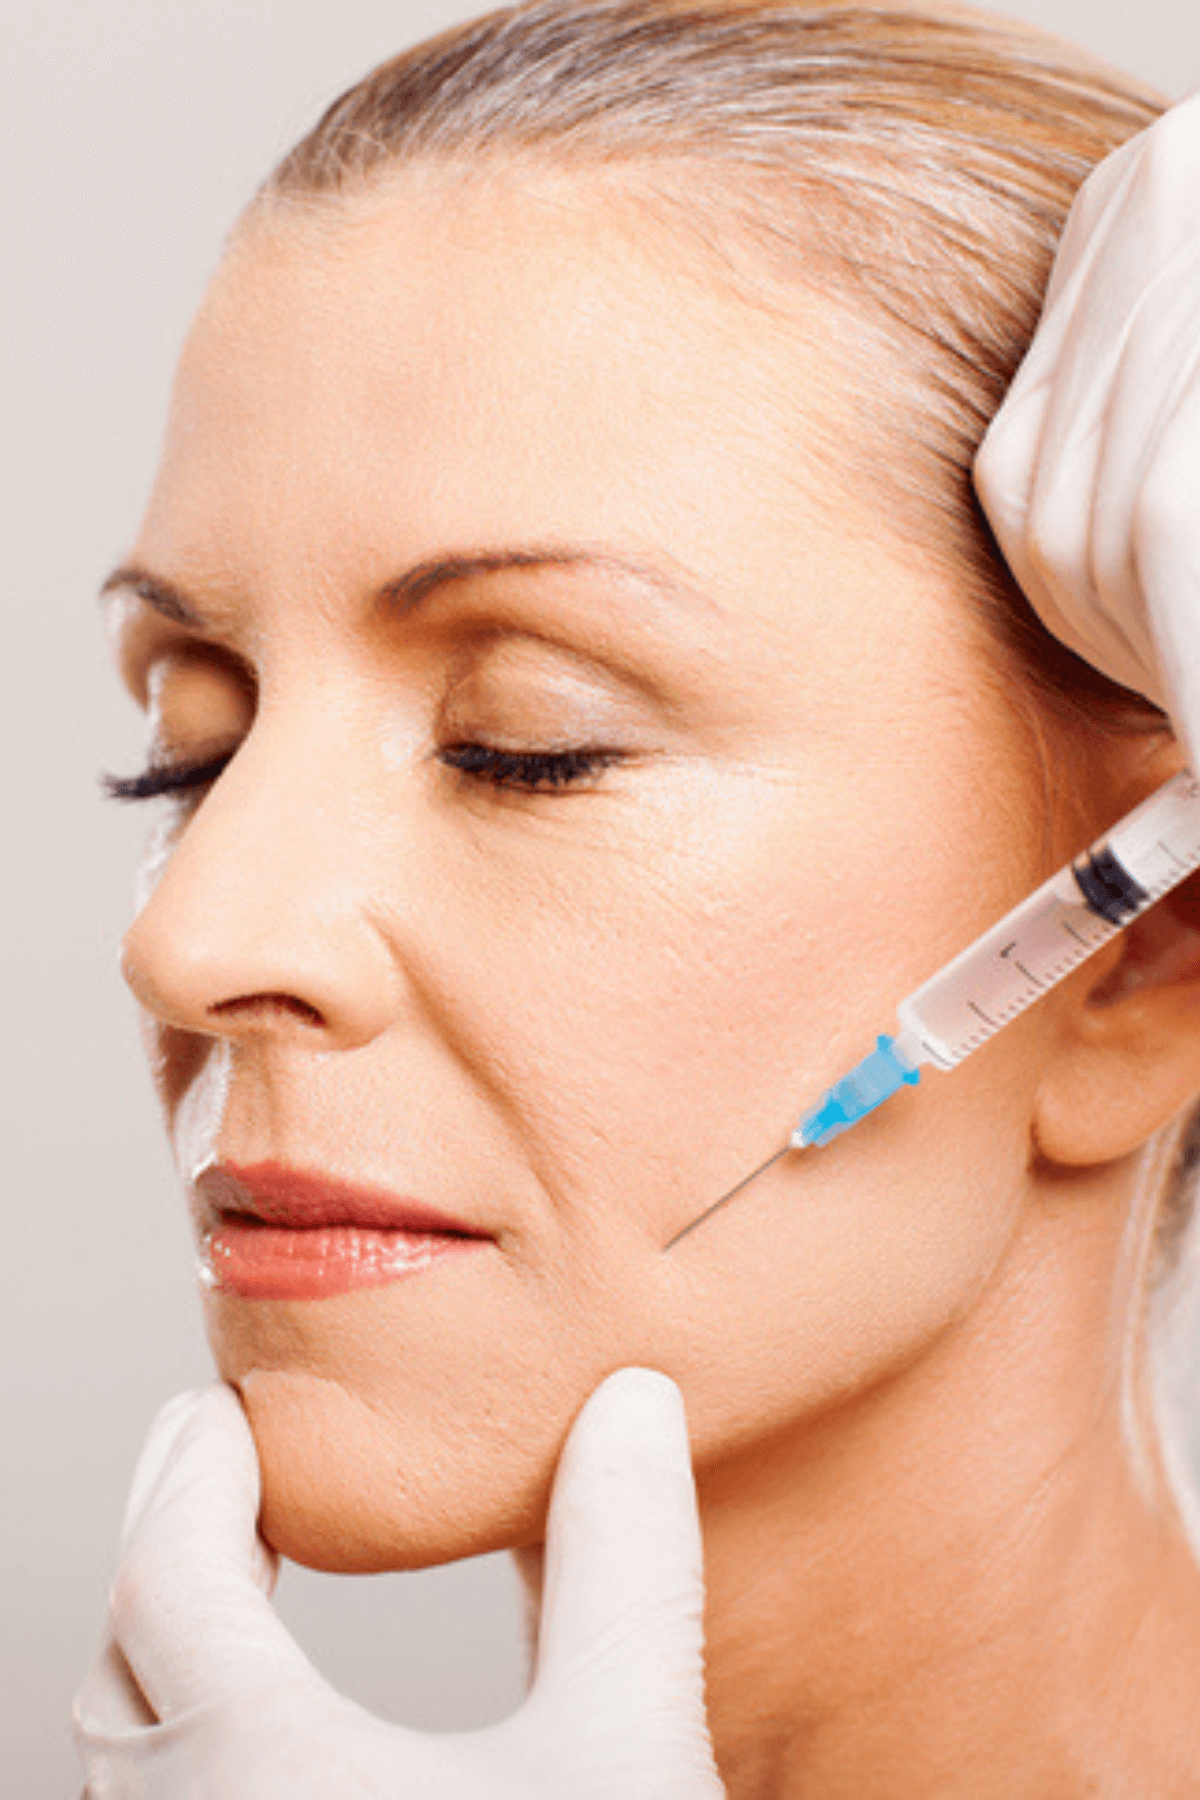 Anti Ageing Treatments - Botox, Fillers, Threads - Dr Anvika